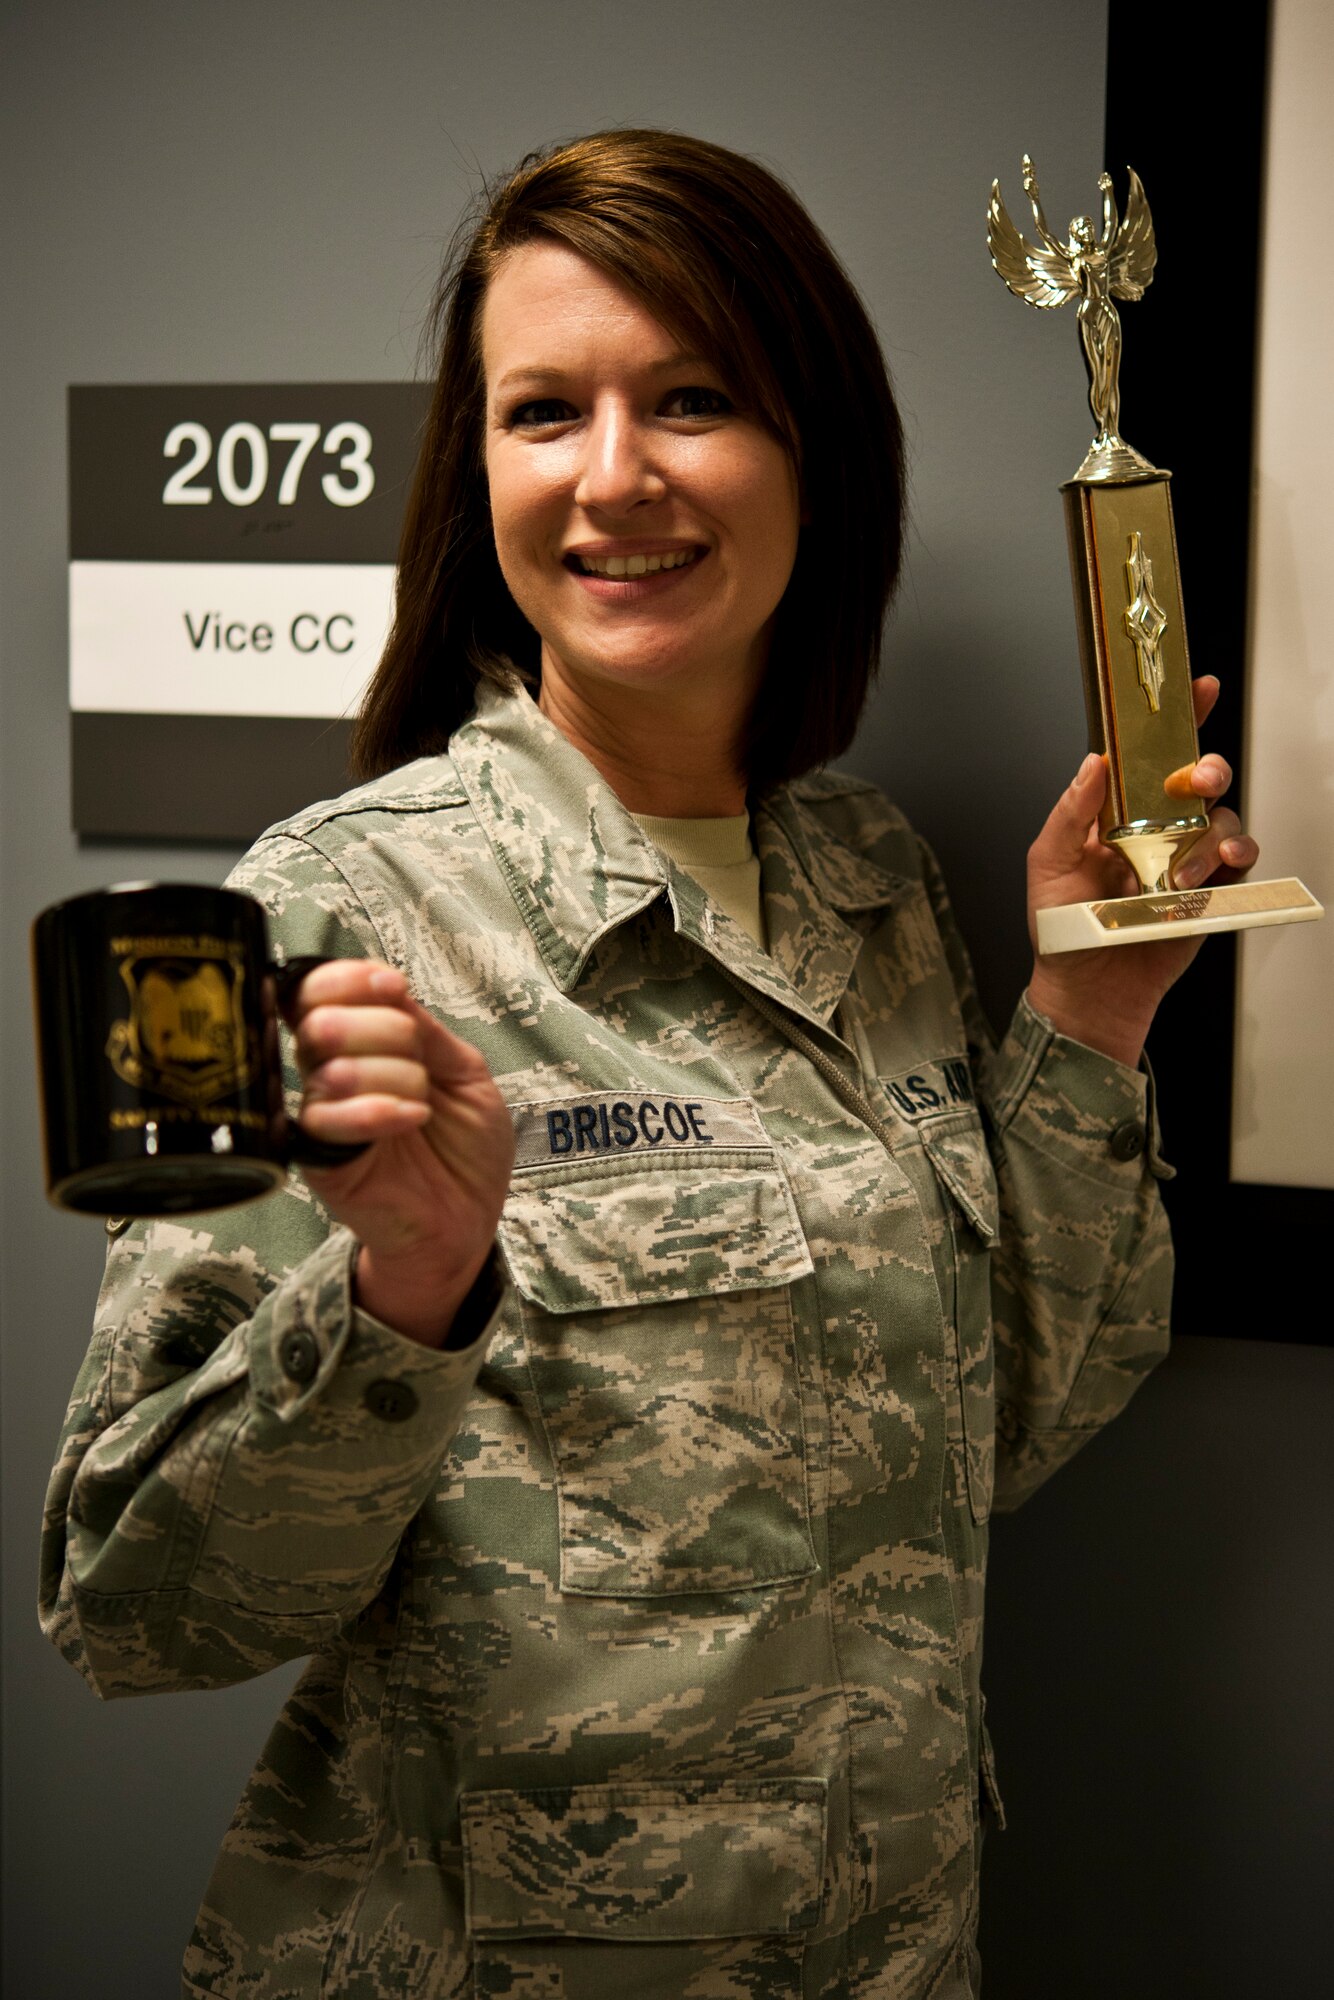 Staff Sgt. Jennifer Briscoe, 442nd Medical Squadron, poses for a photo May 15, 2014 at Whiteman Air Force Base, Missouri. Briscoe was named NCO of the Quarter for the first quarter of 2014. (U.S. Air Force photo by Senior Airman Daniel Phelps/Released)